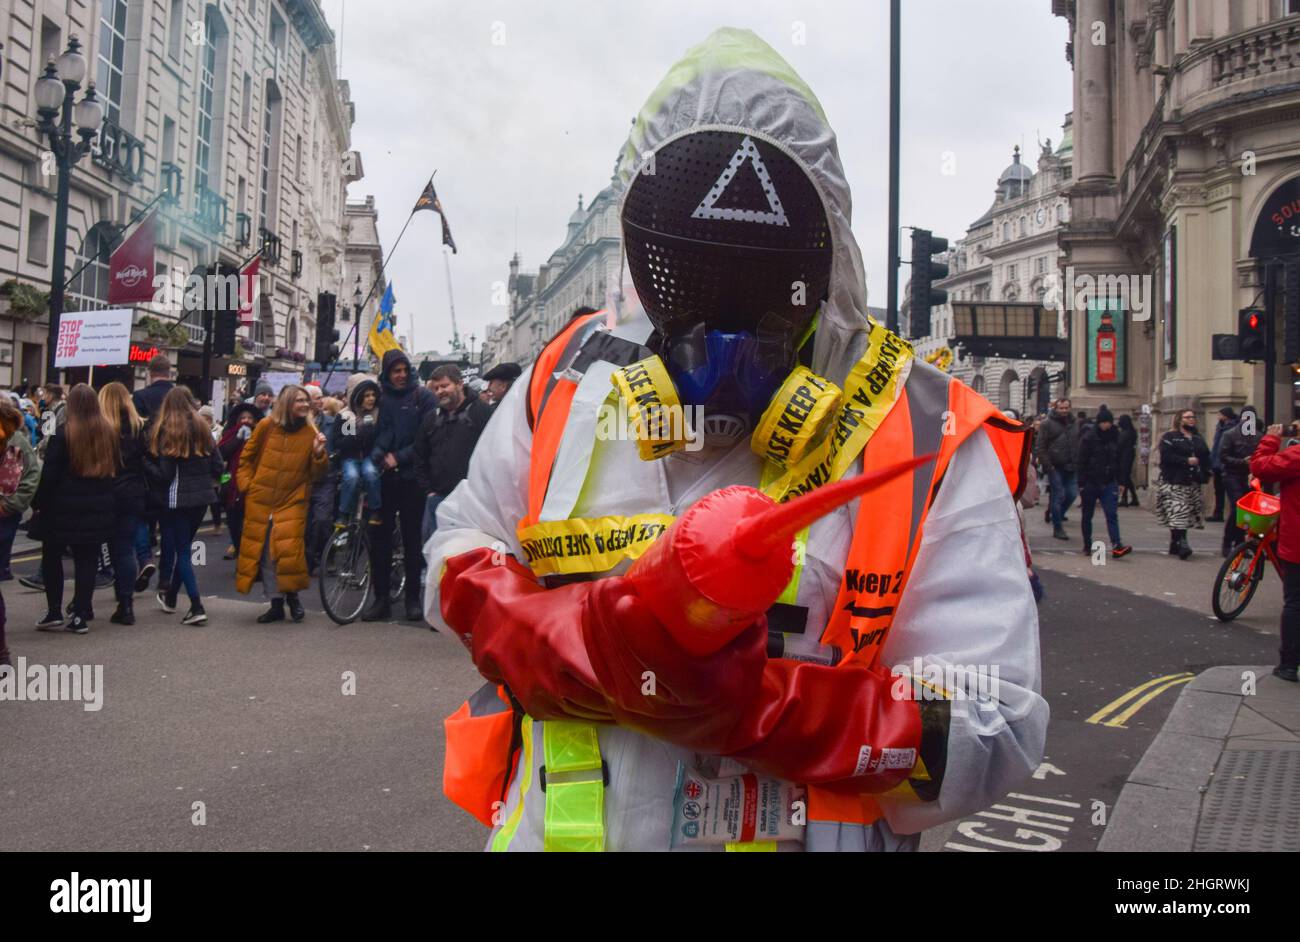 London, UK 22nd January 2022. A protester in Piccadilly Circus. Thousands of people marched through Central London in protest against mandatory vaccines for NHS staff, face masks, covid vaccines, vaccination passports and various other grievances fuelled by conspiracy theories. Credit: Vuk Valcic / Alamy Live News Stock Photo